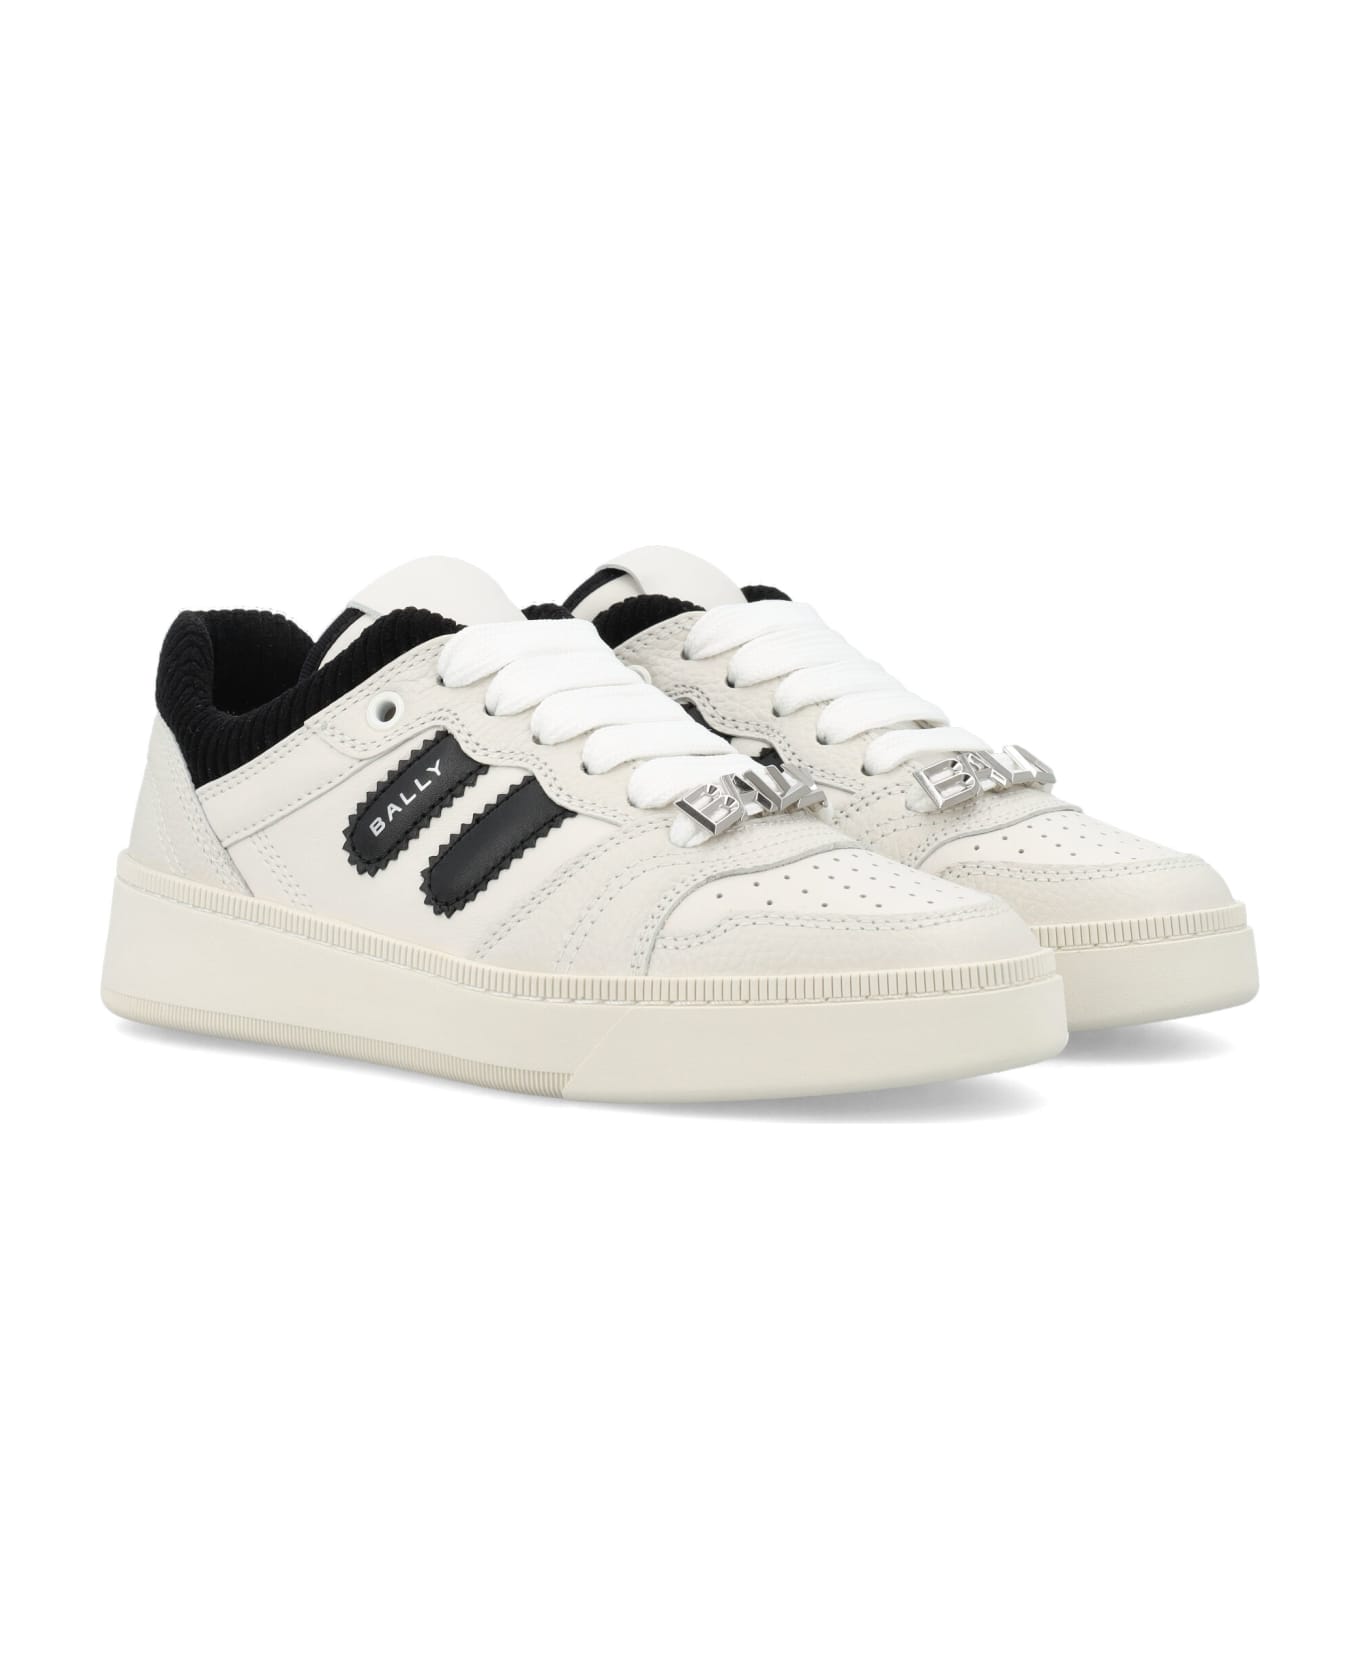 Bally Royalty-w Leather Sneakers - WHITE/BLACK スニーカー